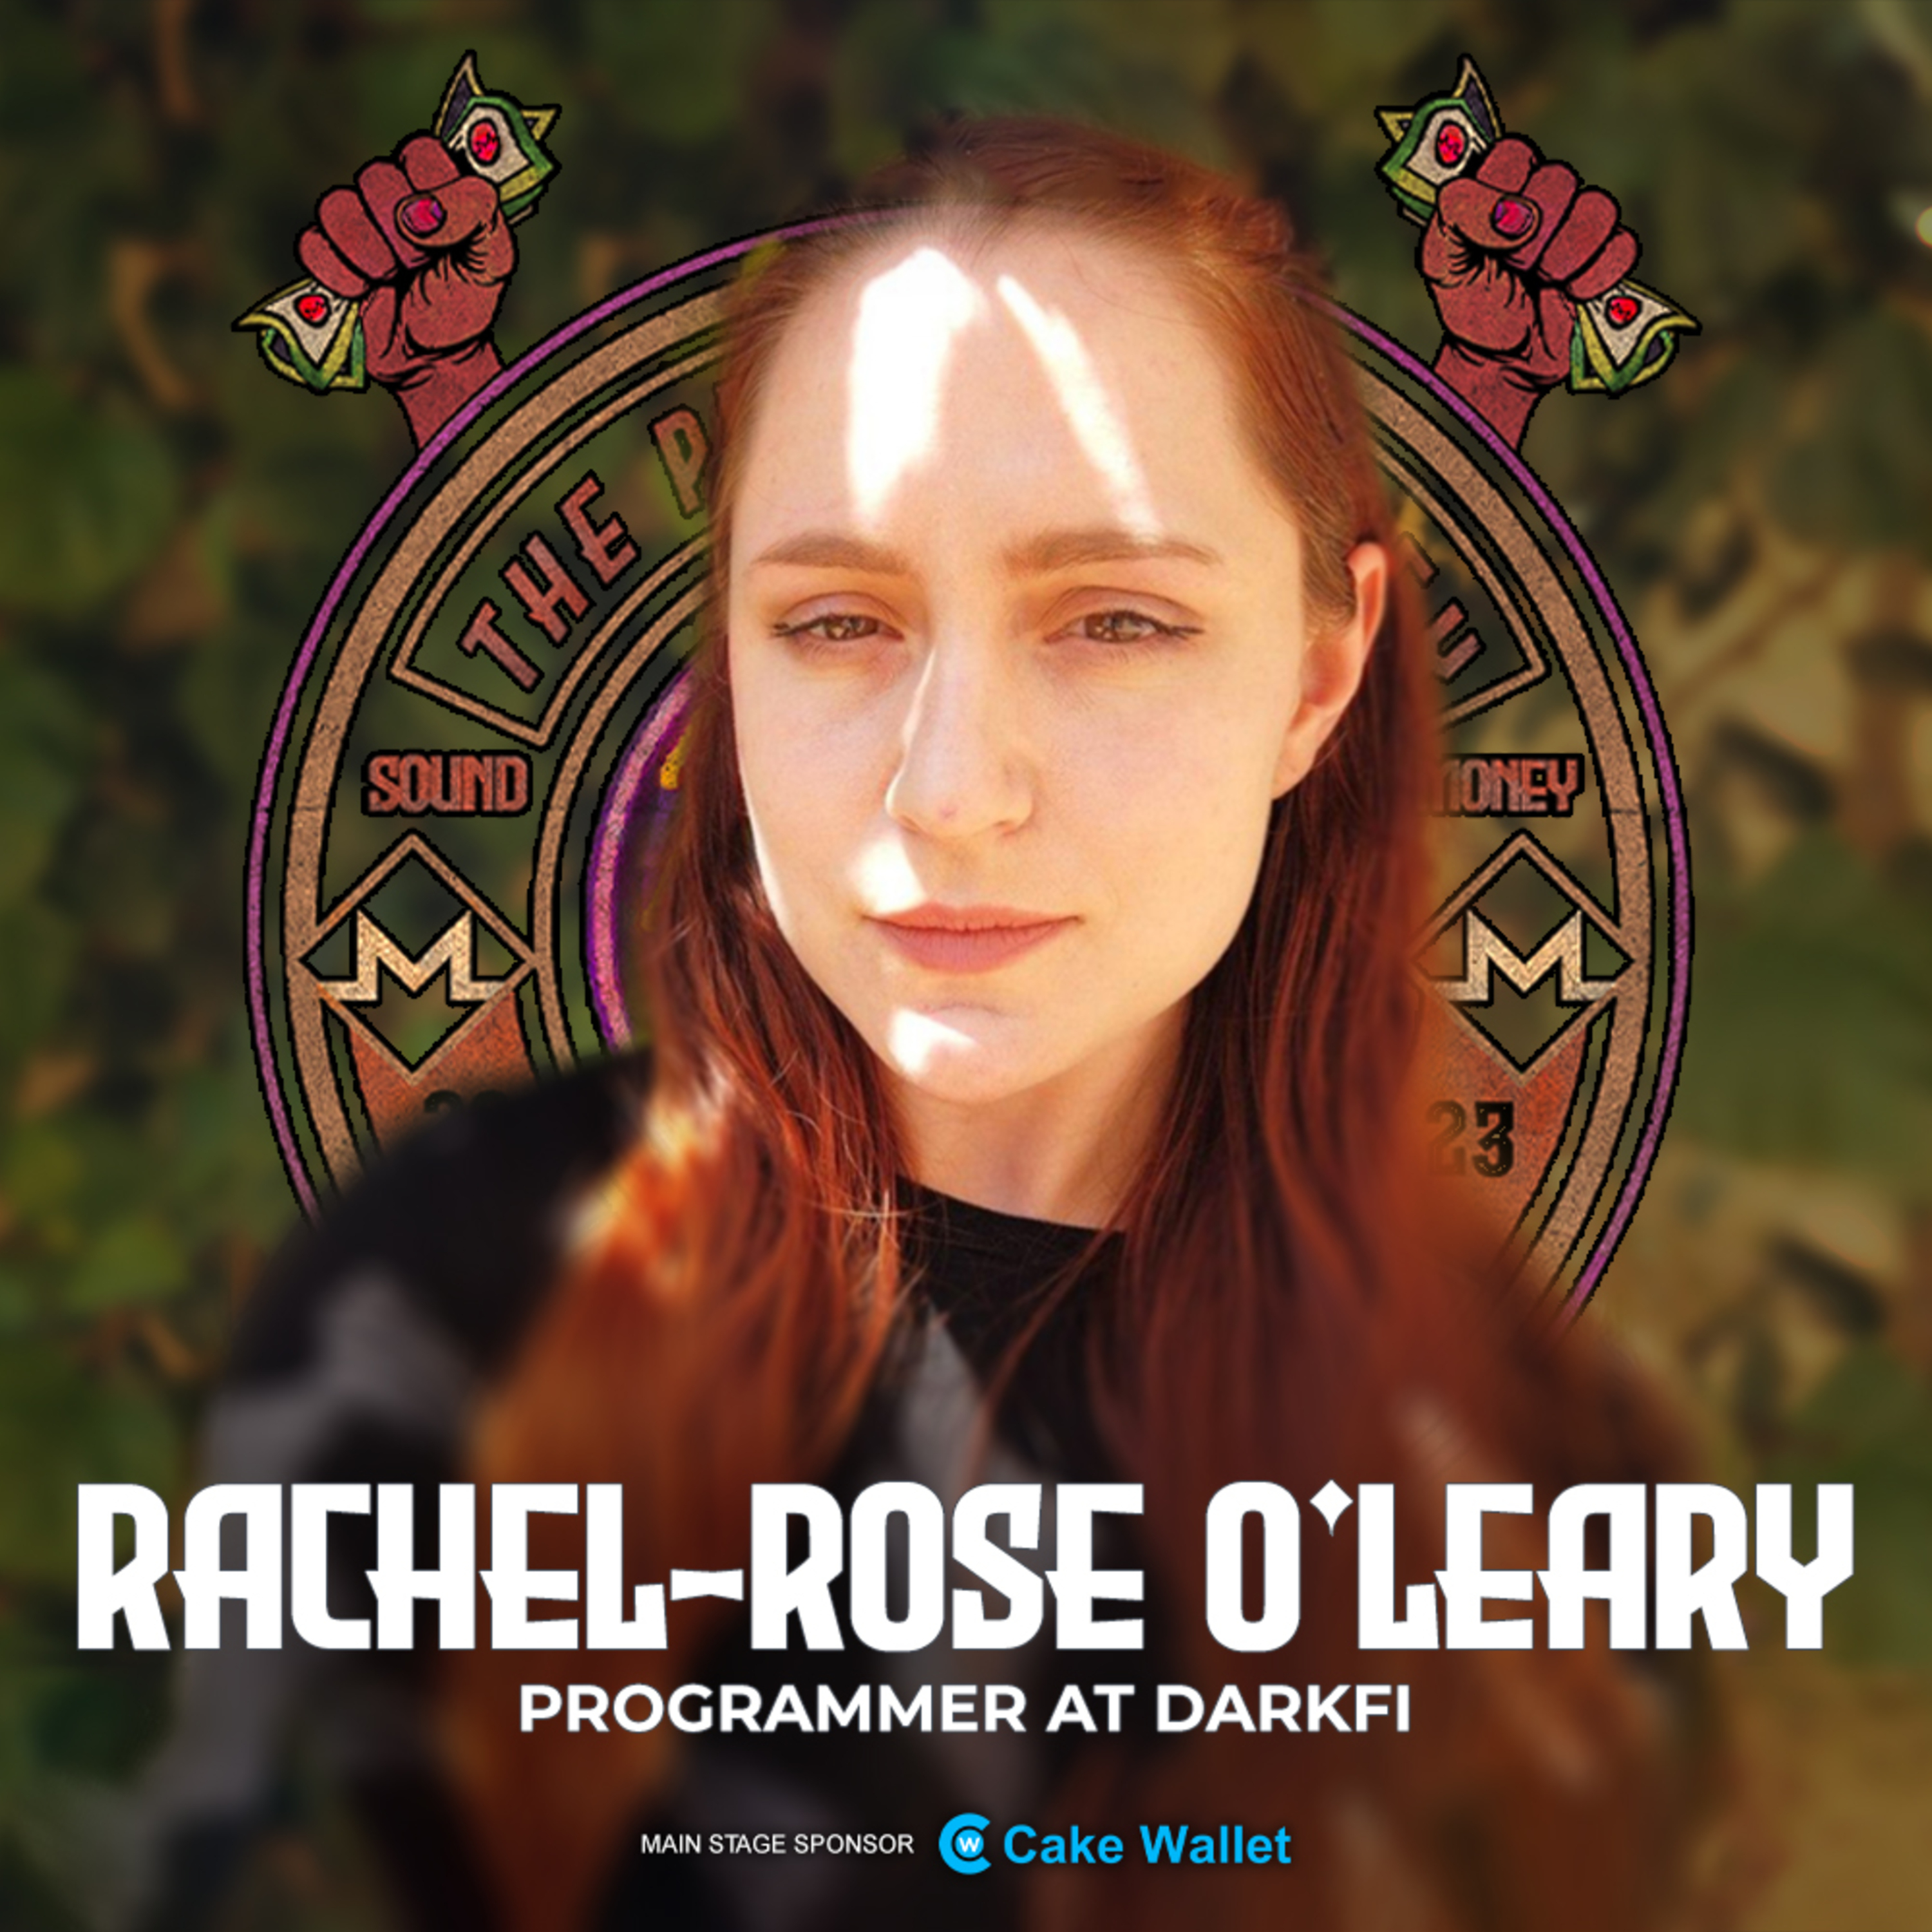 Anon Tech Revolution: Why and How with Rachel-Rose O’leary from DarkFi (Monerotopia23)